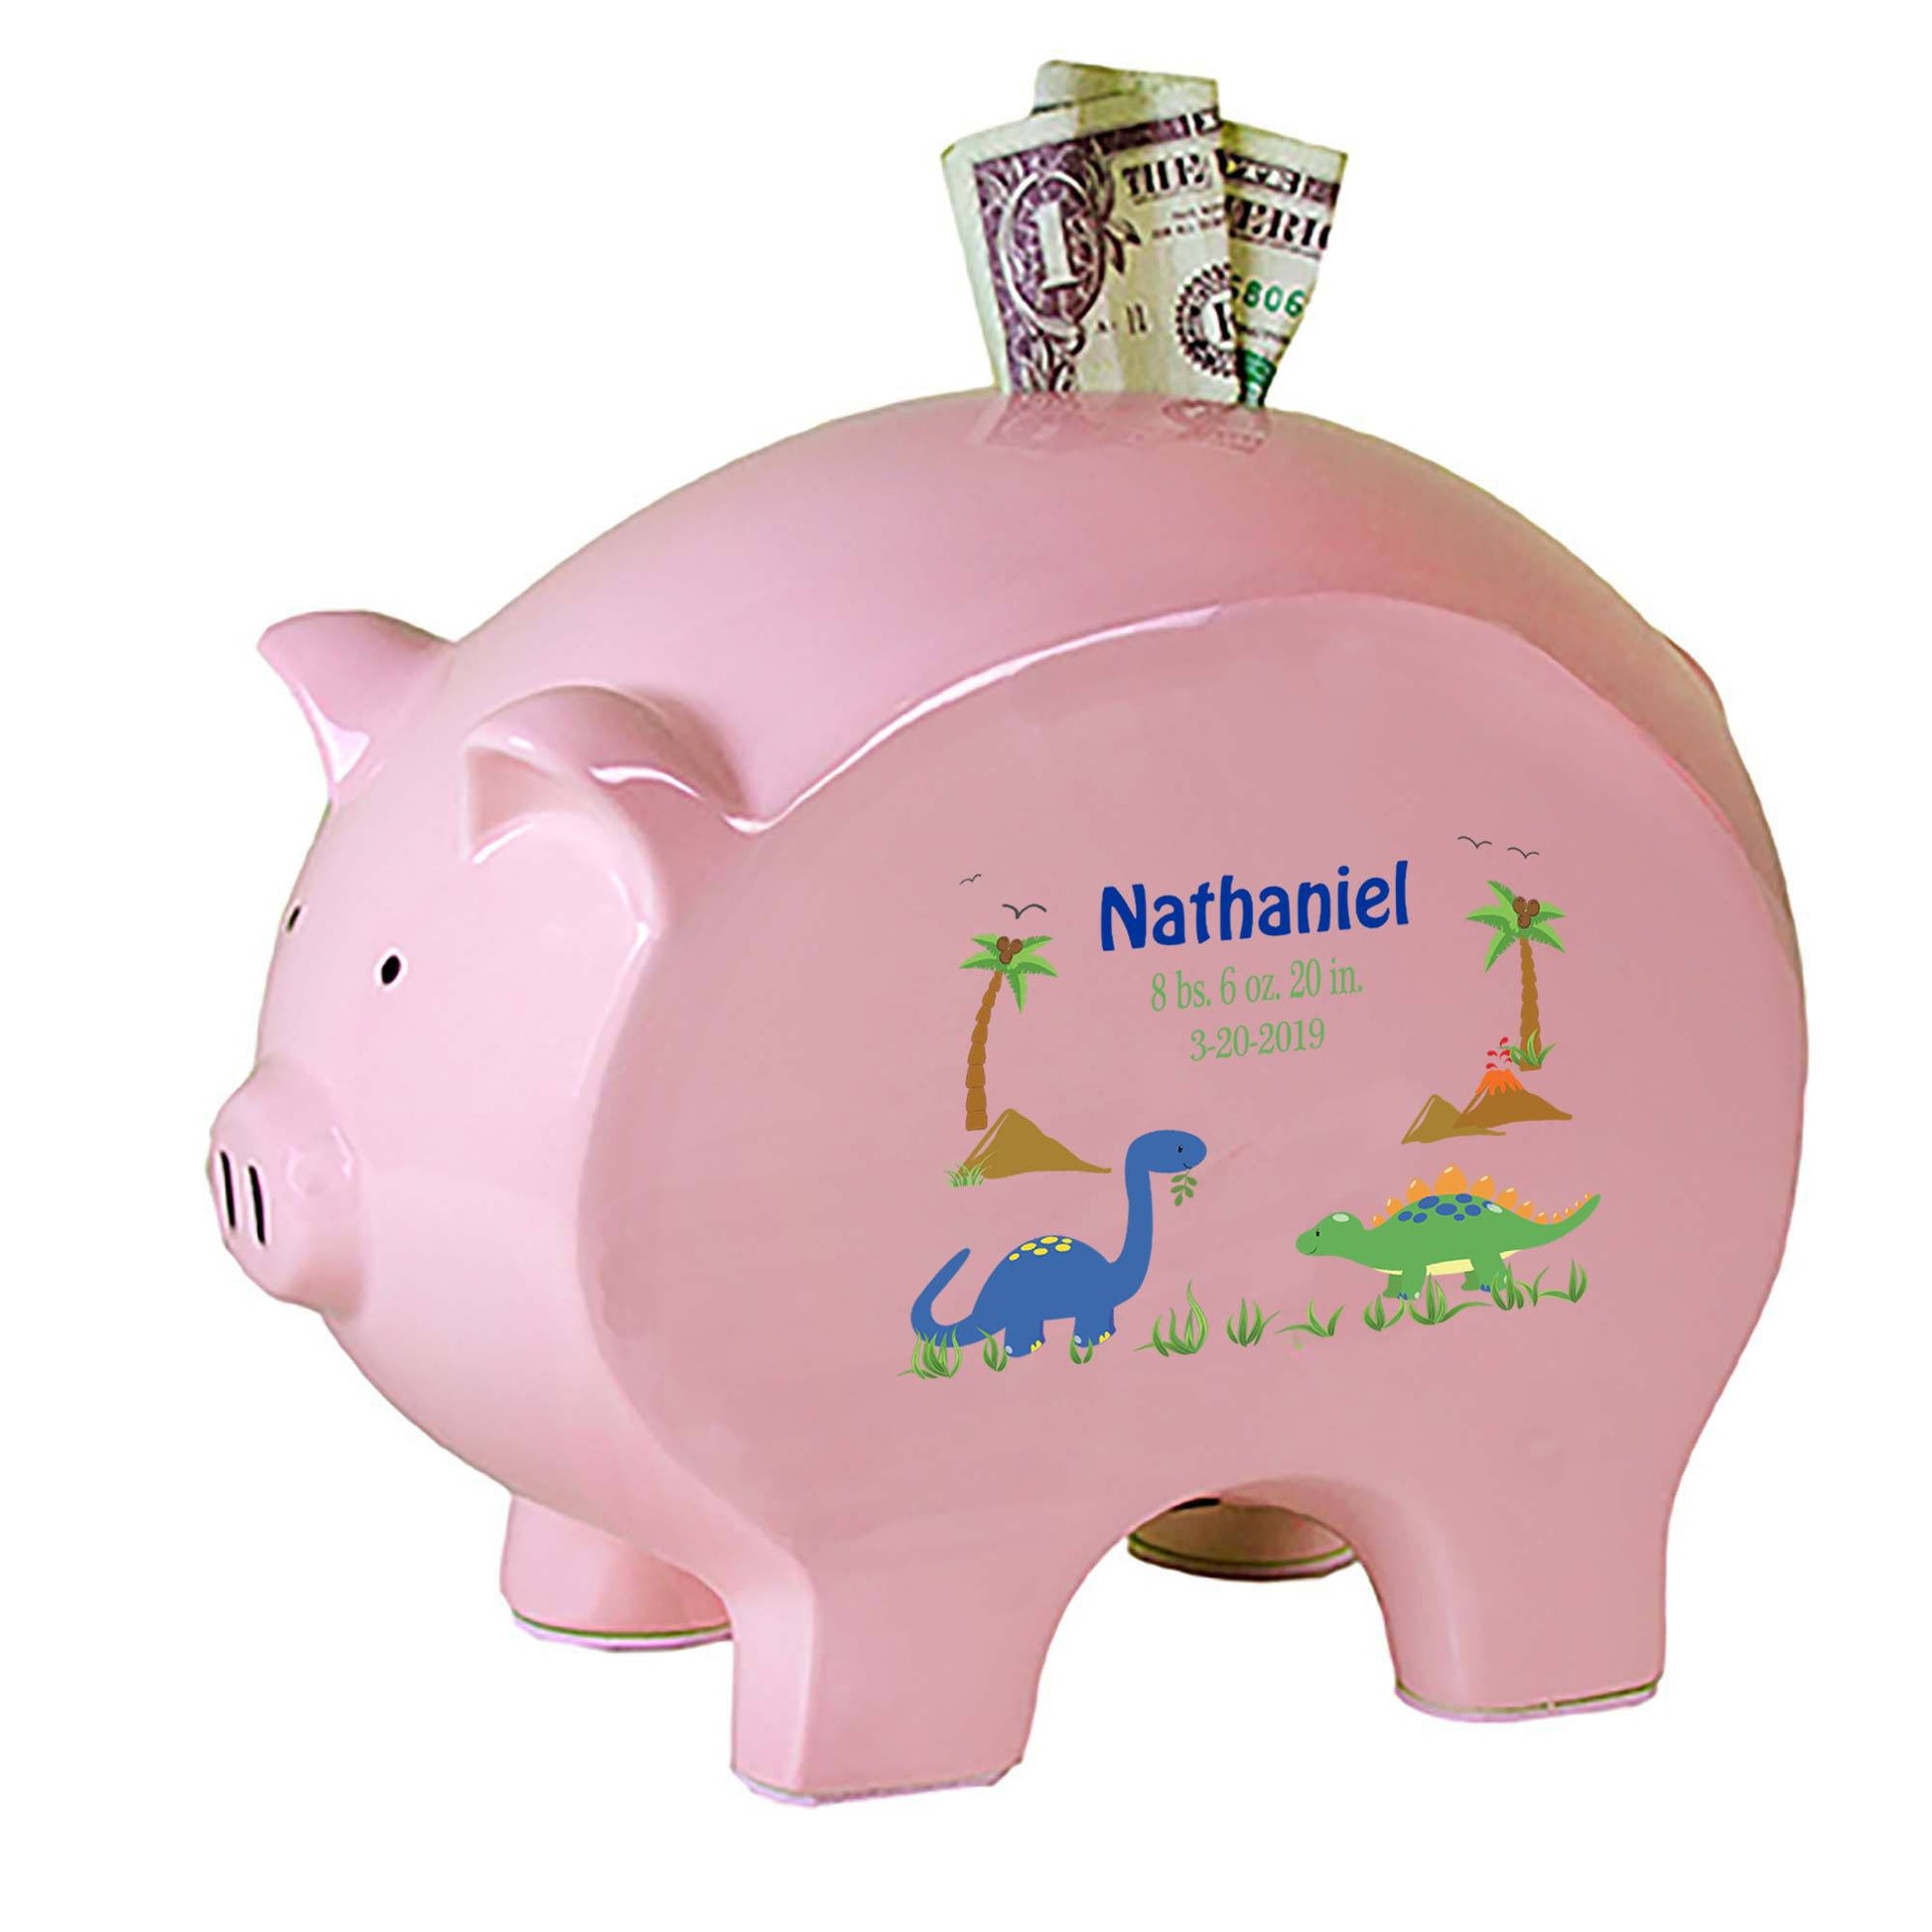 Personalized Pink Piggy Bank with Dinosaurs design